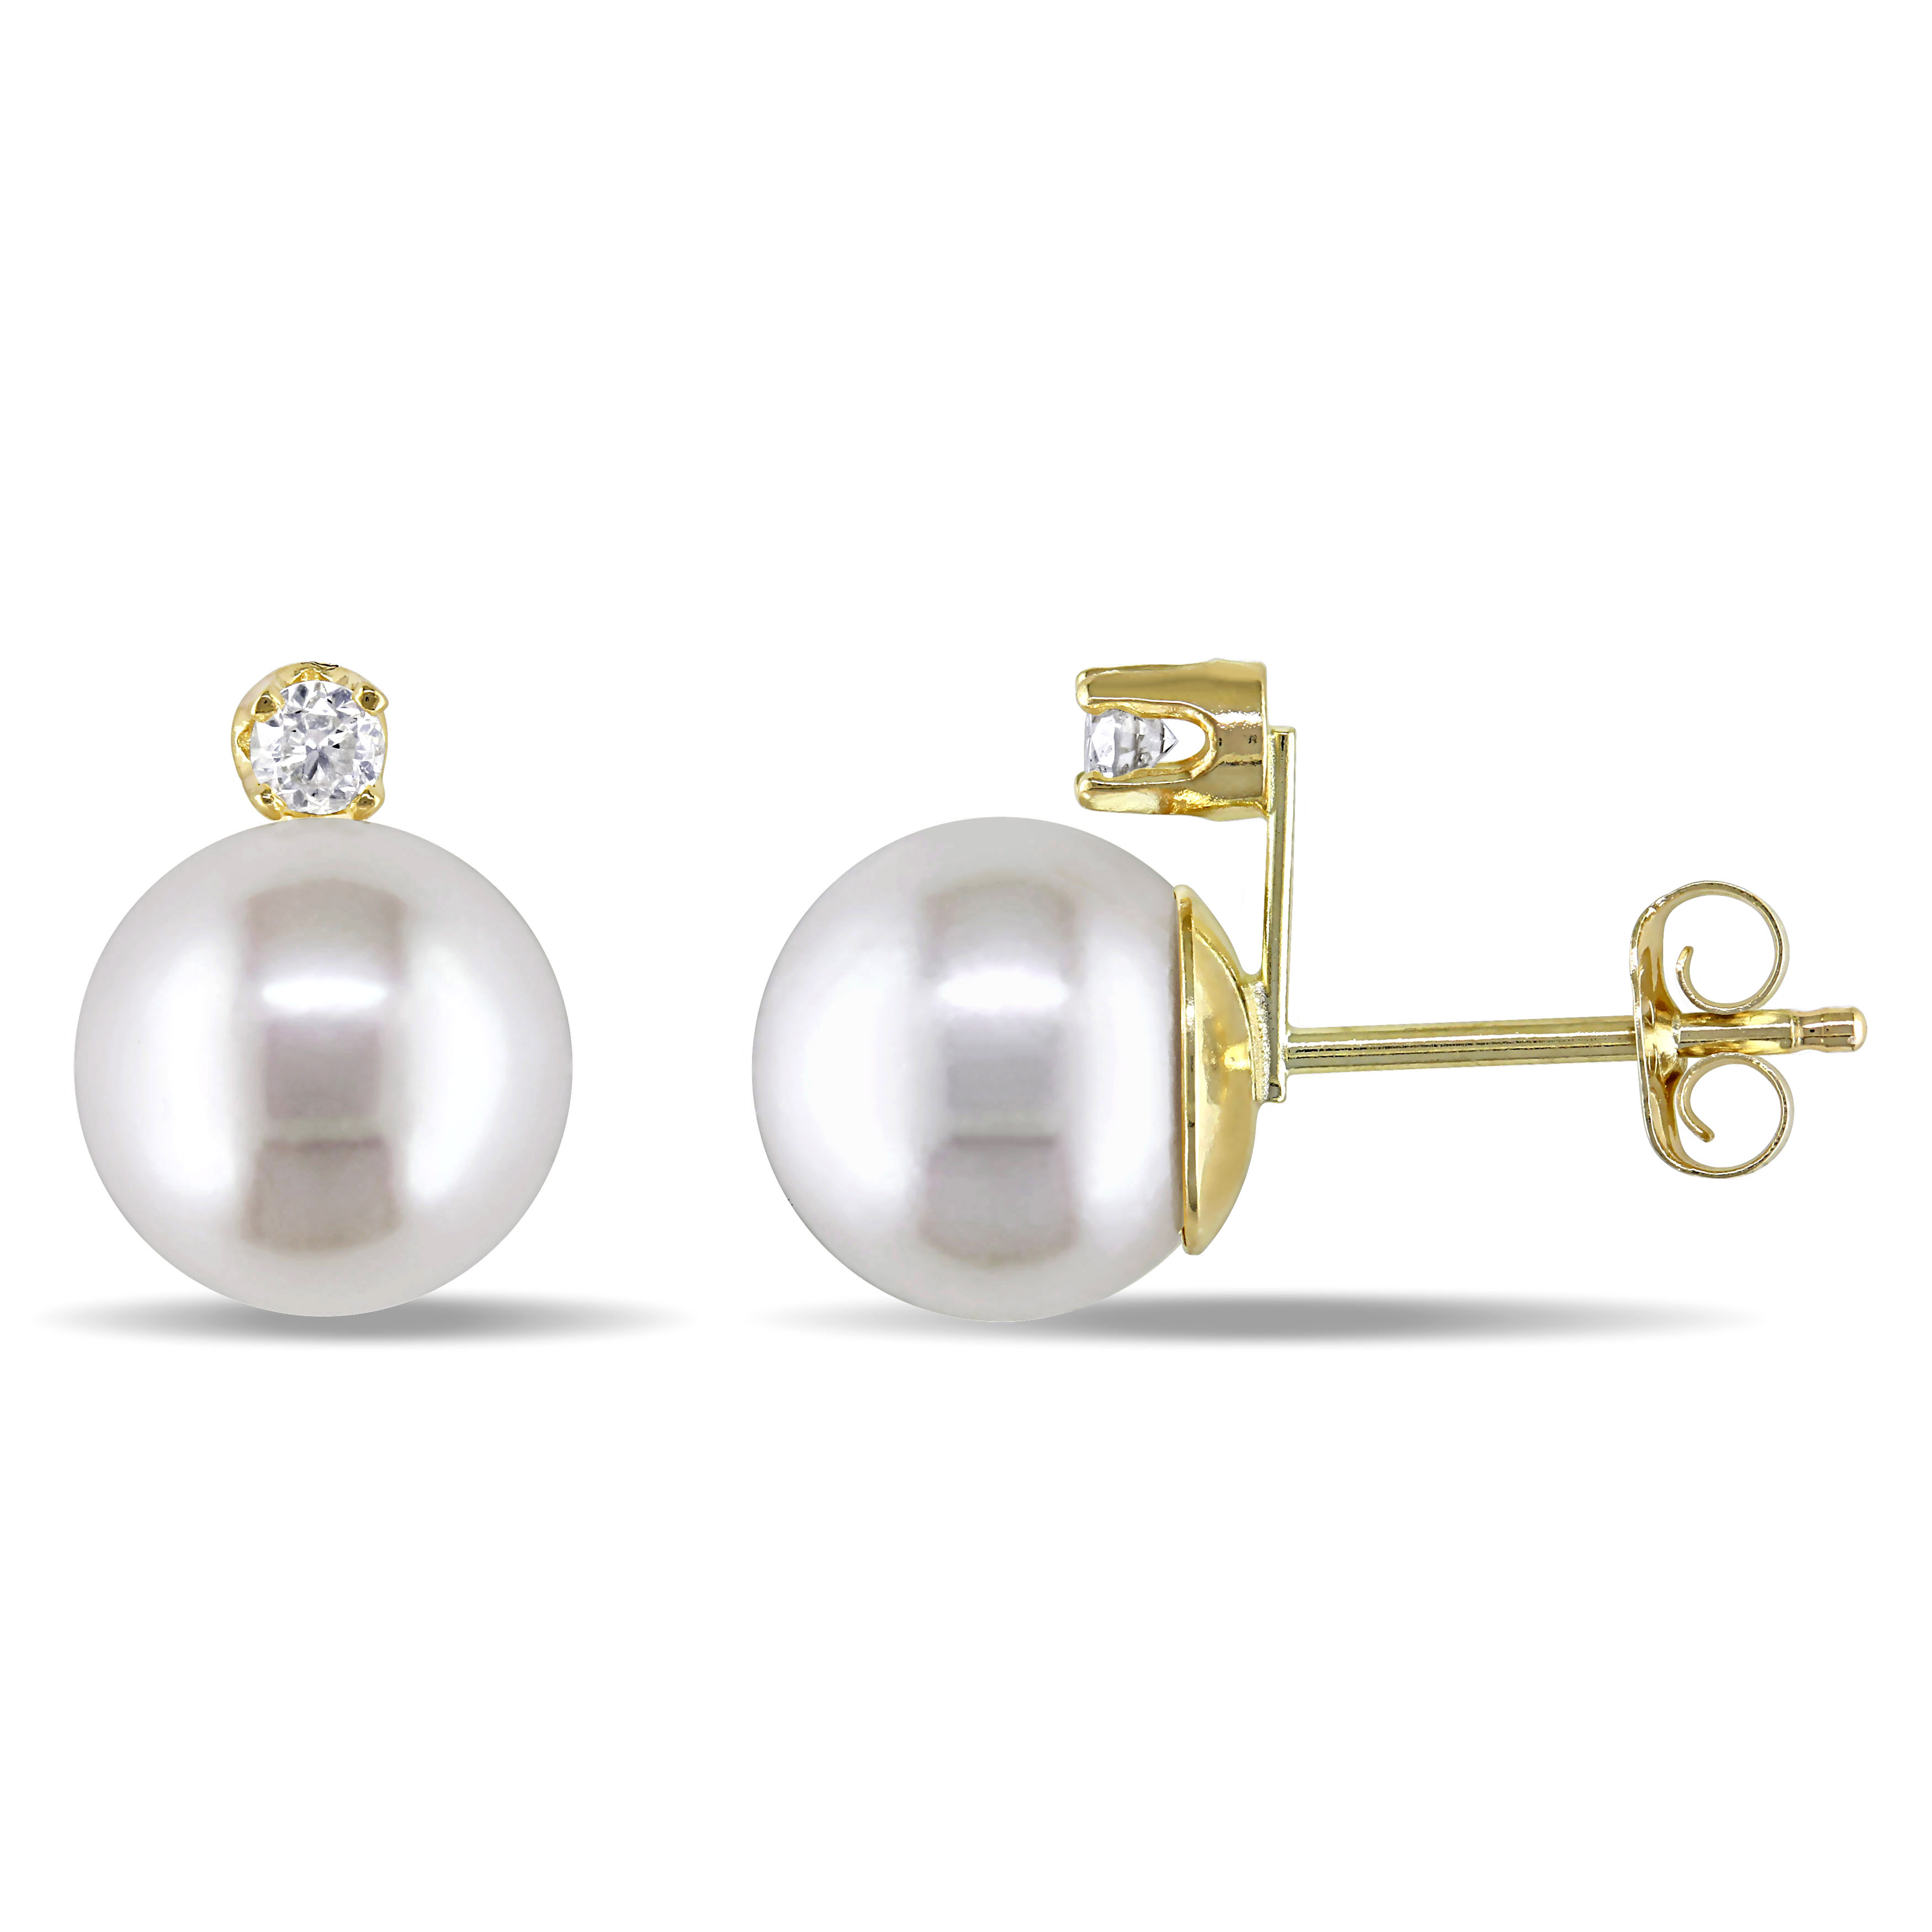 8 - 9 MM Cultured Freshwater Pearl and 1/10 CT TW Diamond Stud Earrings in 14k Yellow Gold